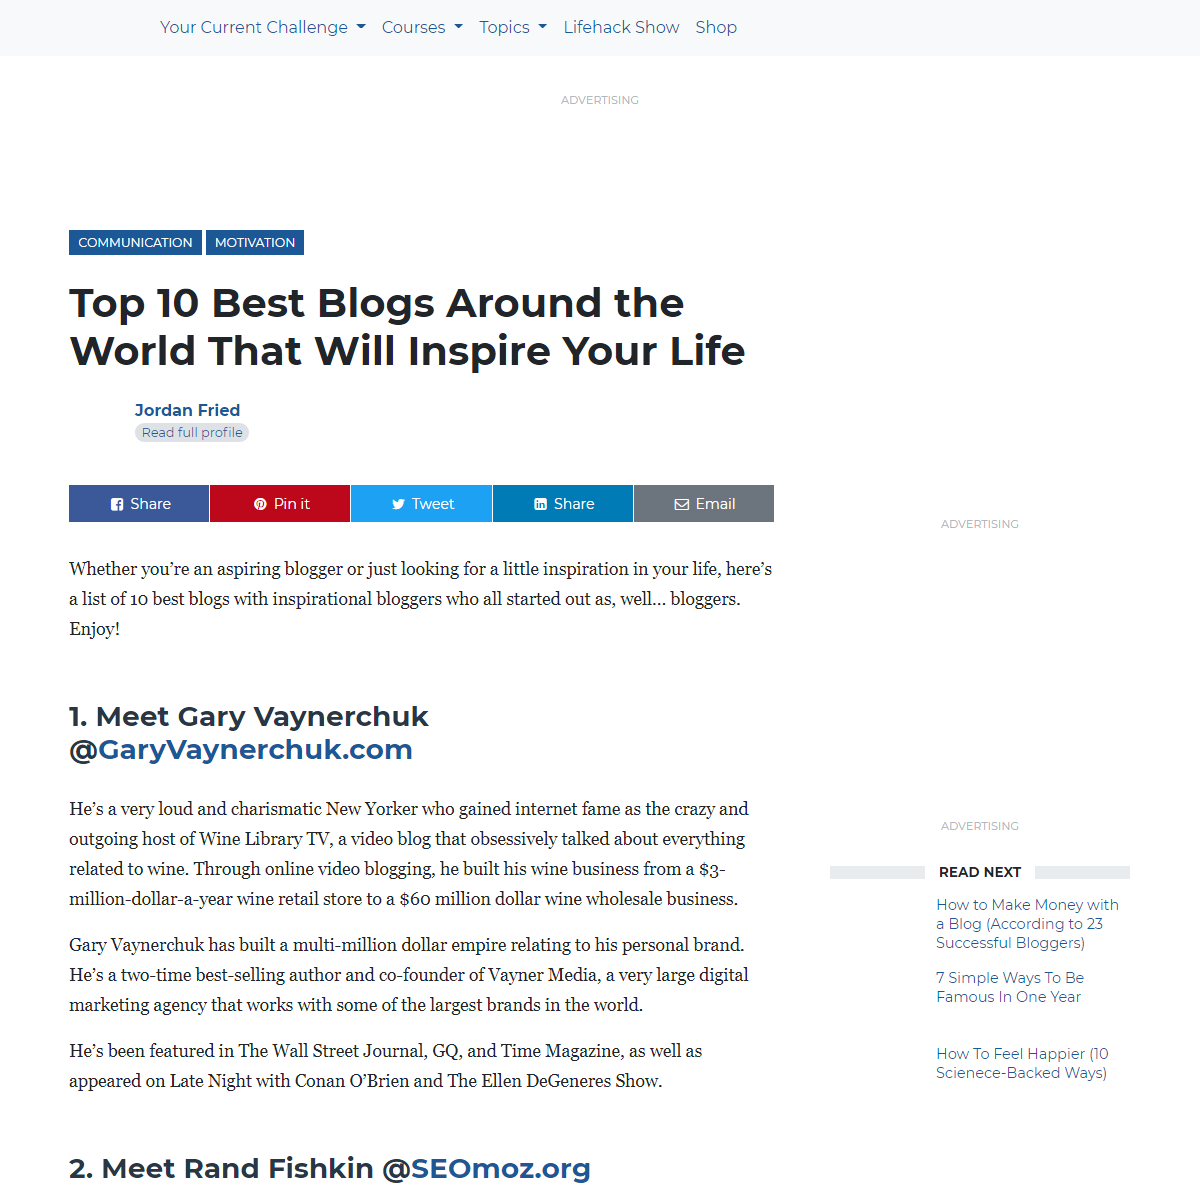 A complete backup of https://www.lifehack.org/articles/communication/top-10-most-inspirational-bloggers-the-world.html